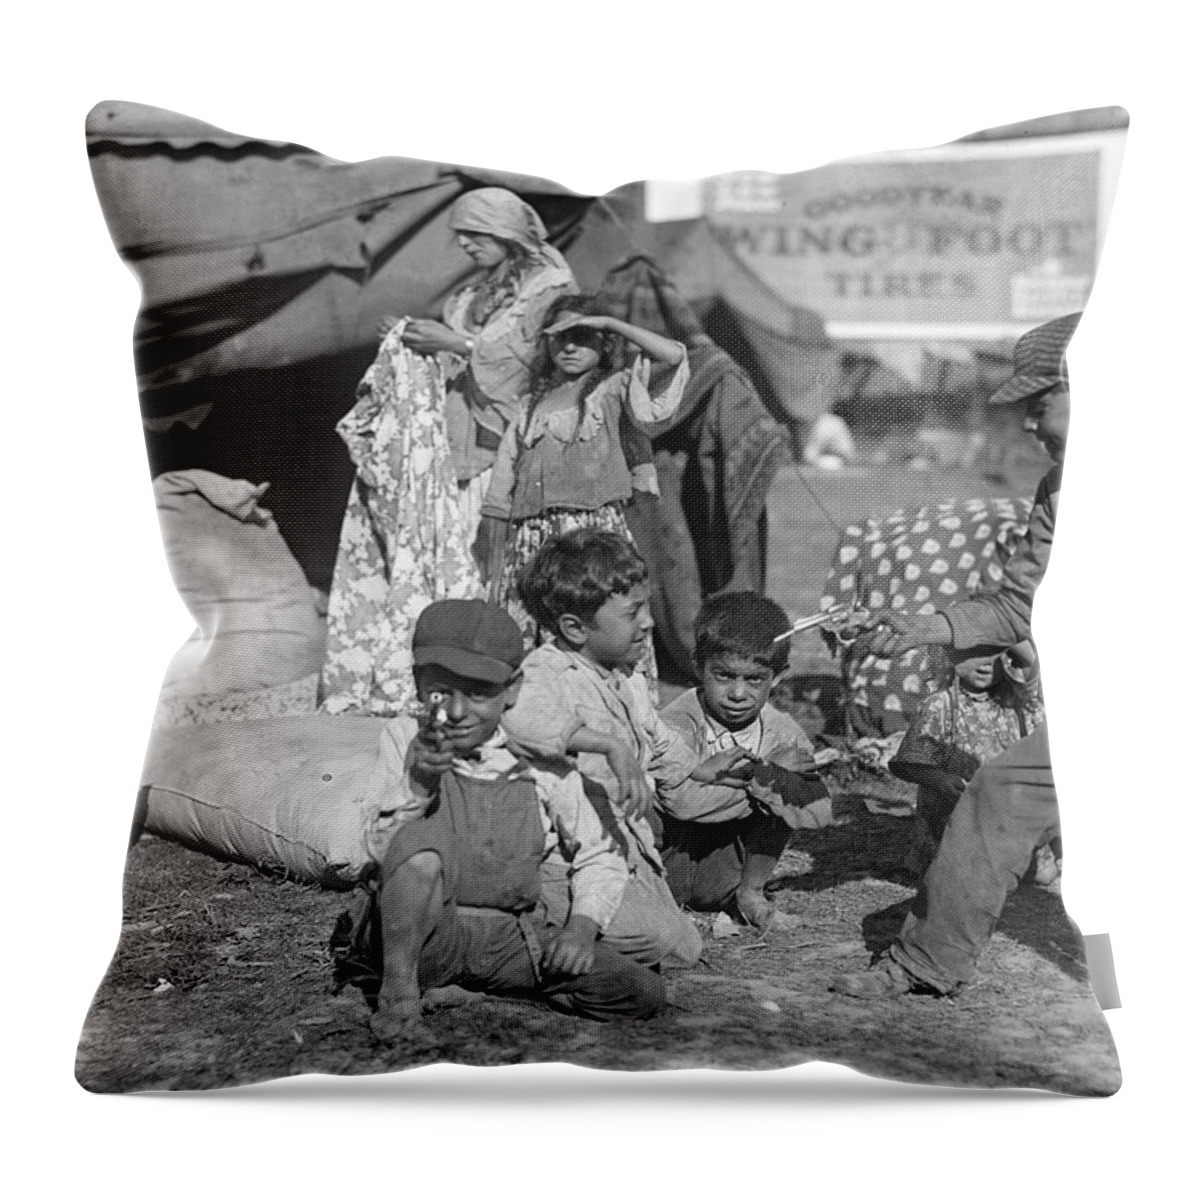 1923 Throw Pillow featuring the photograph Gypsies, C1923 #2 by Granger